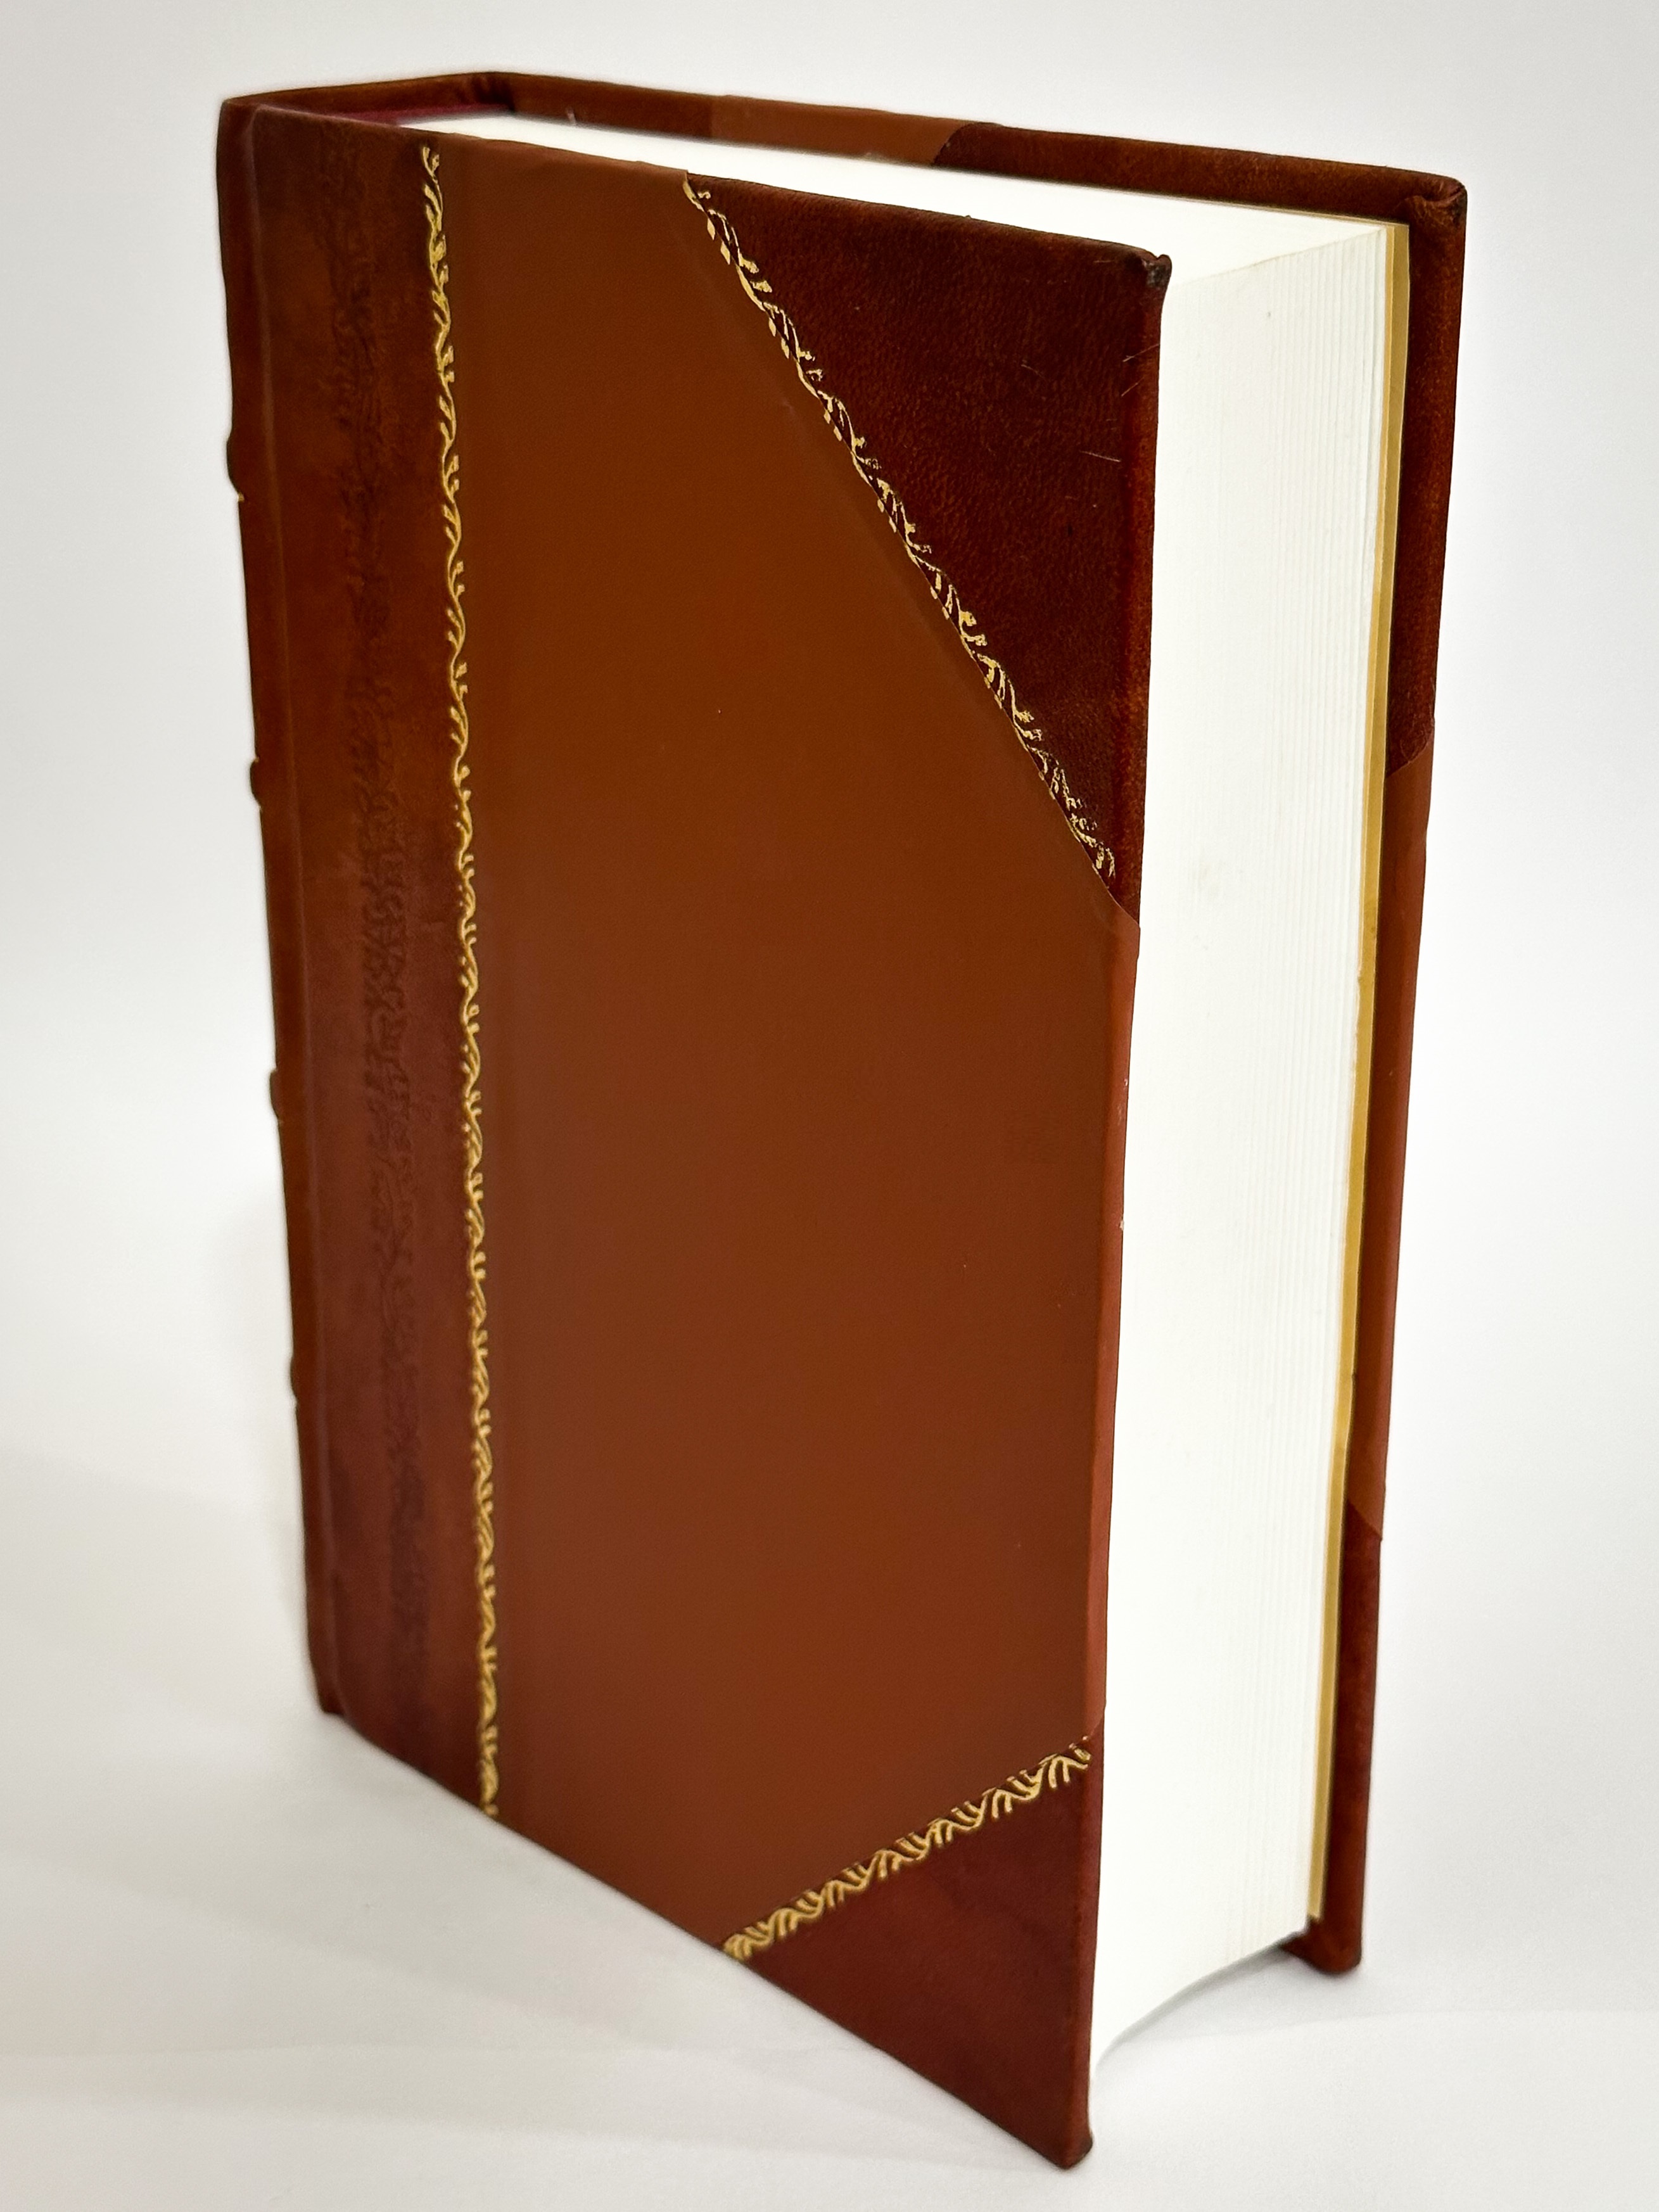 The Autobiography of a Woman Alone / D. Appleton and Company, Publisher (1911) (1911) [Leather Bound] - image 3 of 3